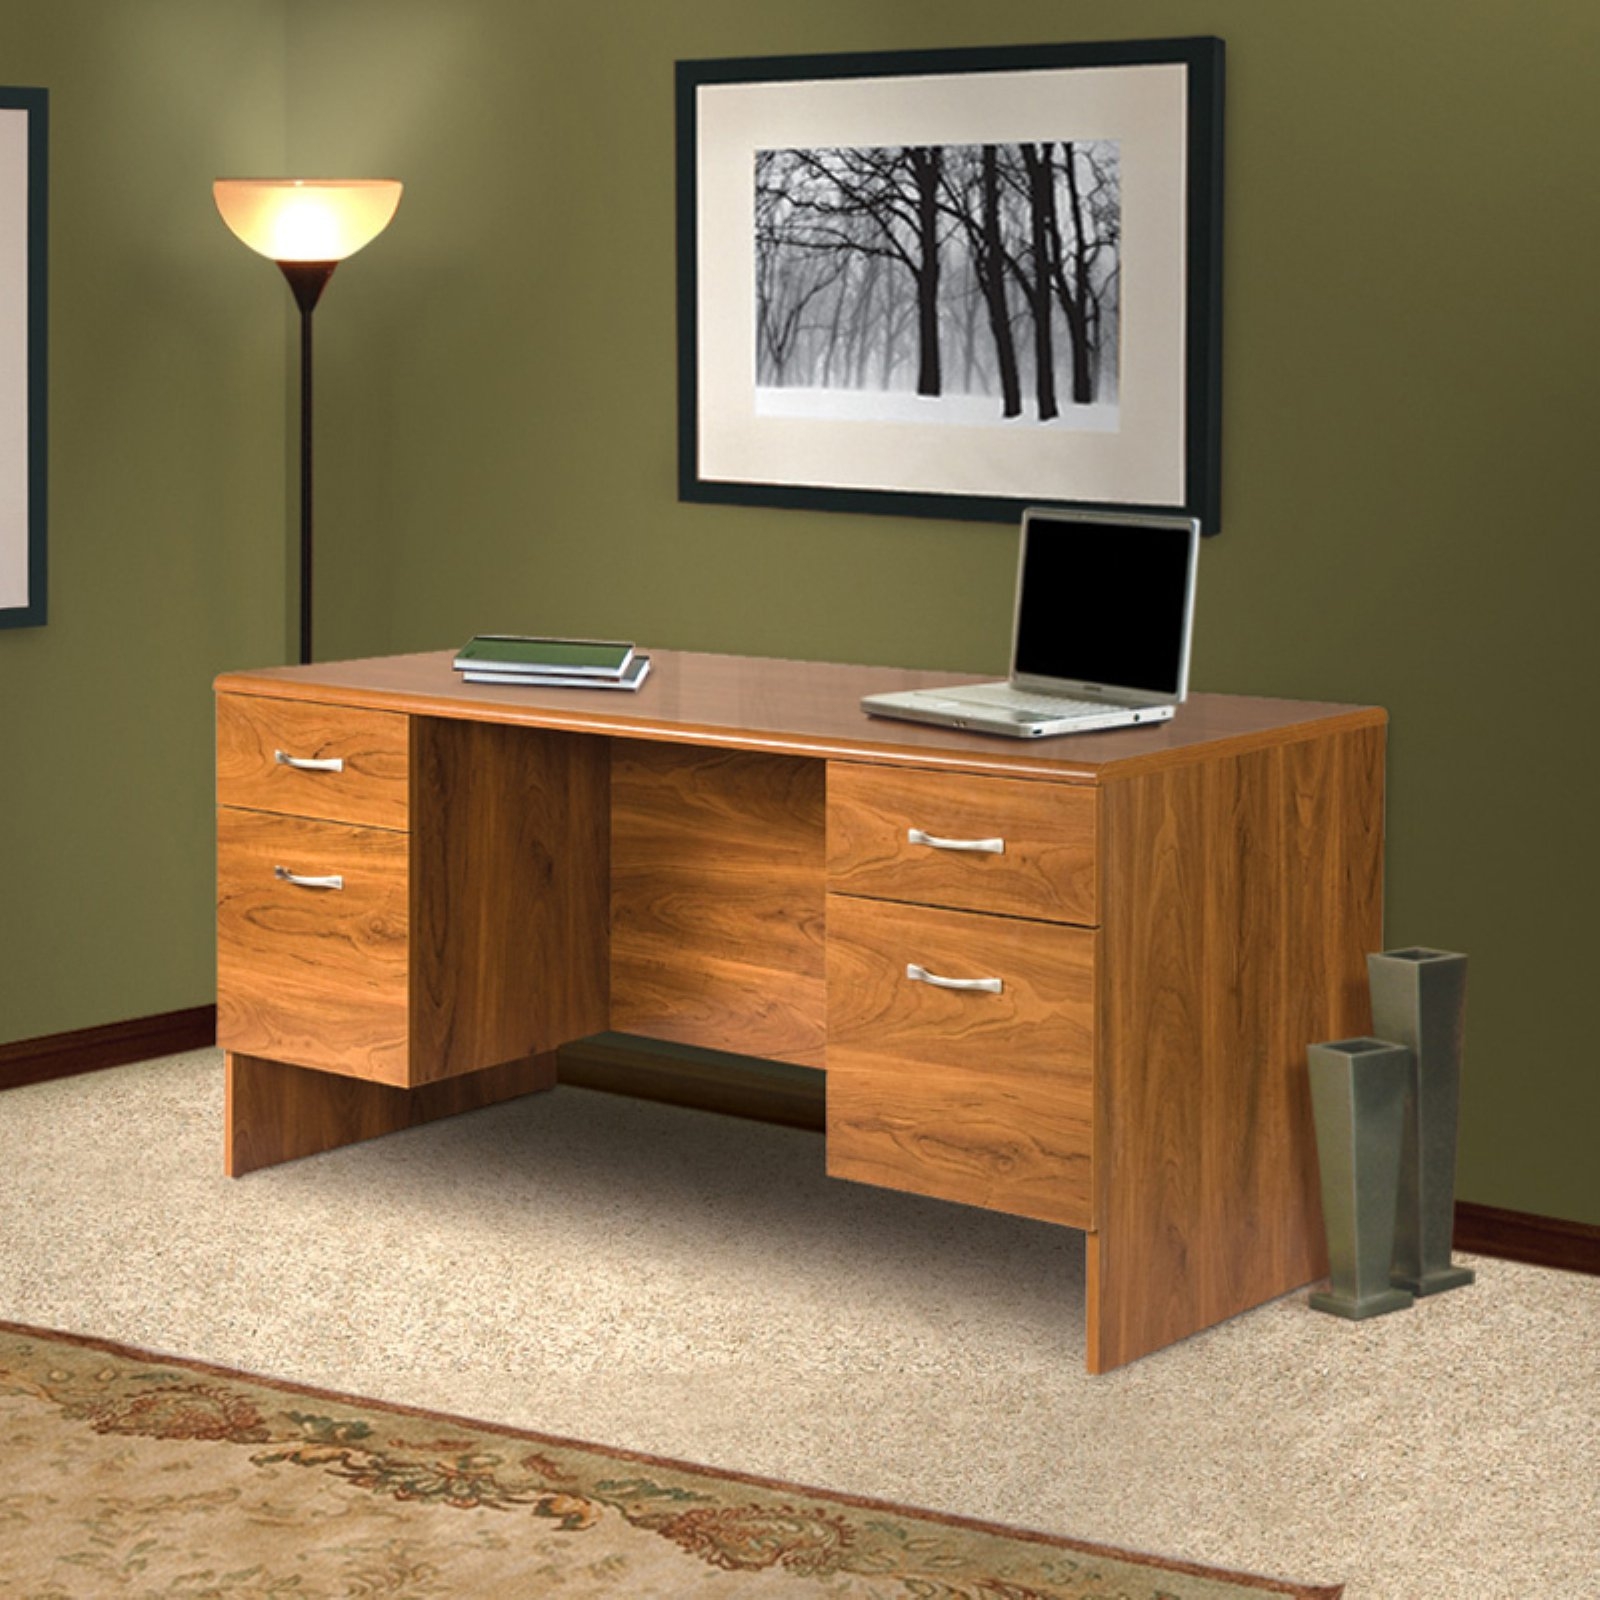 Executive Desk for Home Office - Foter